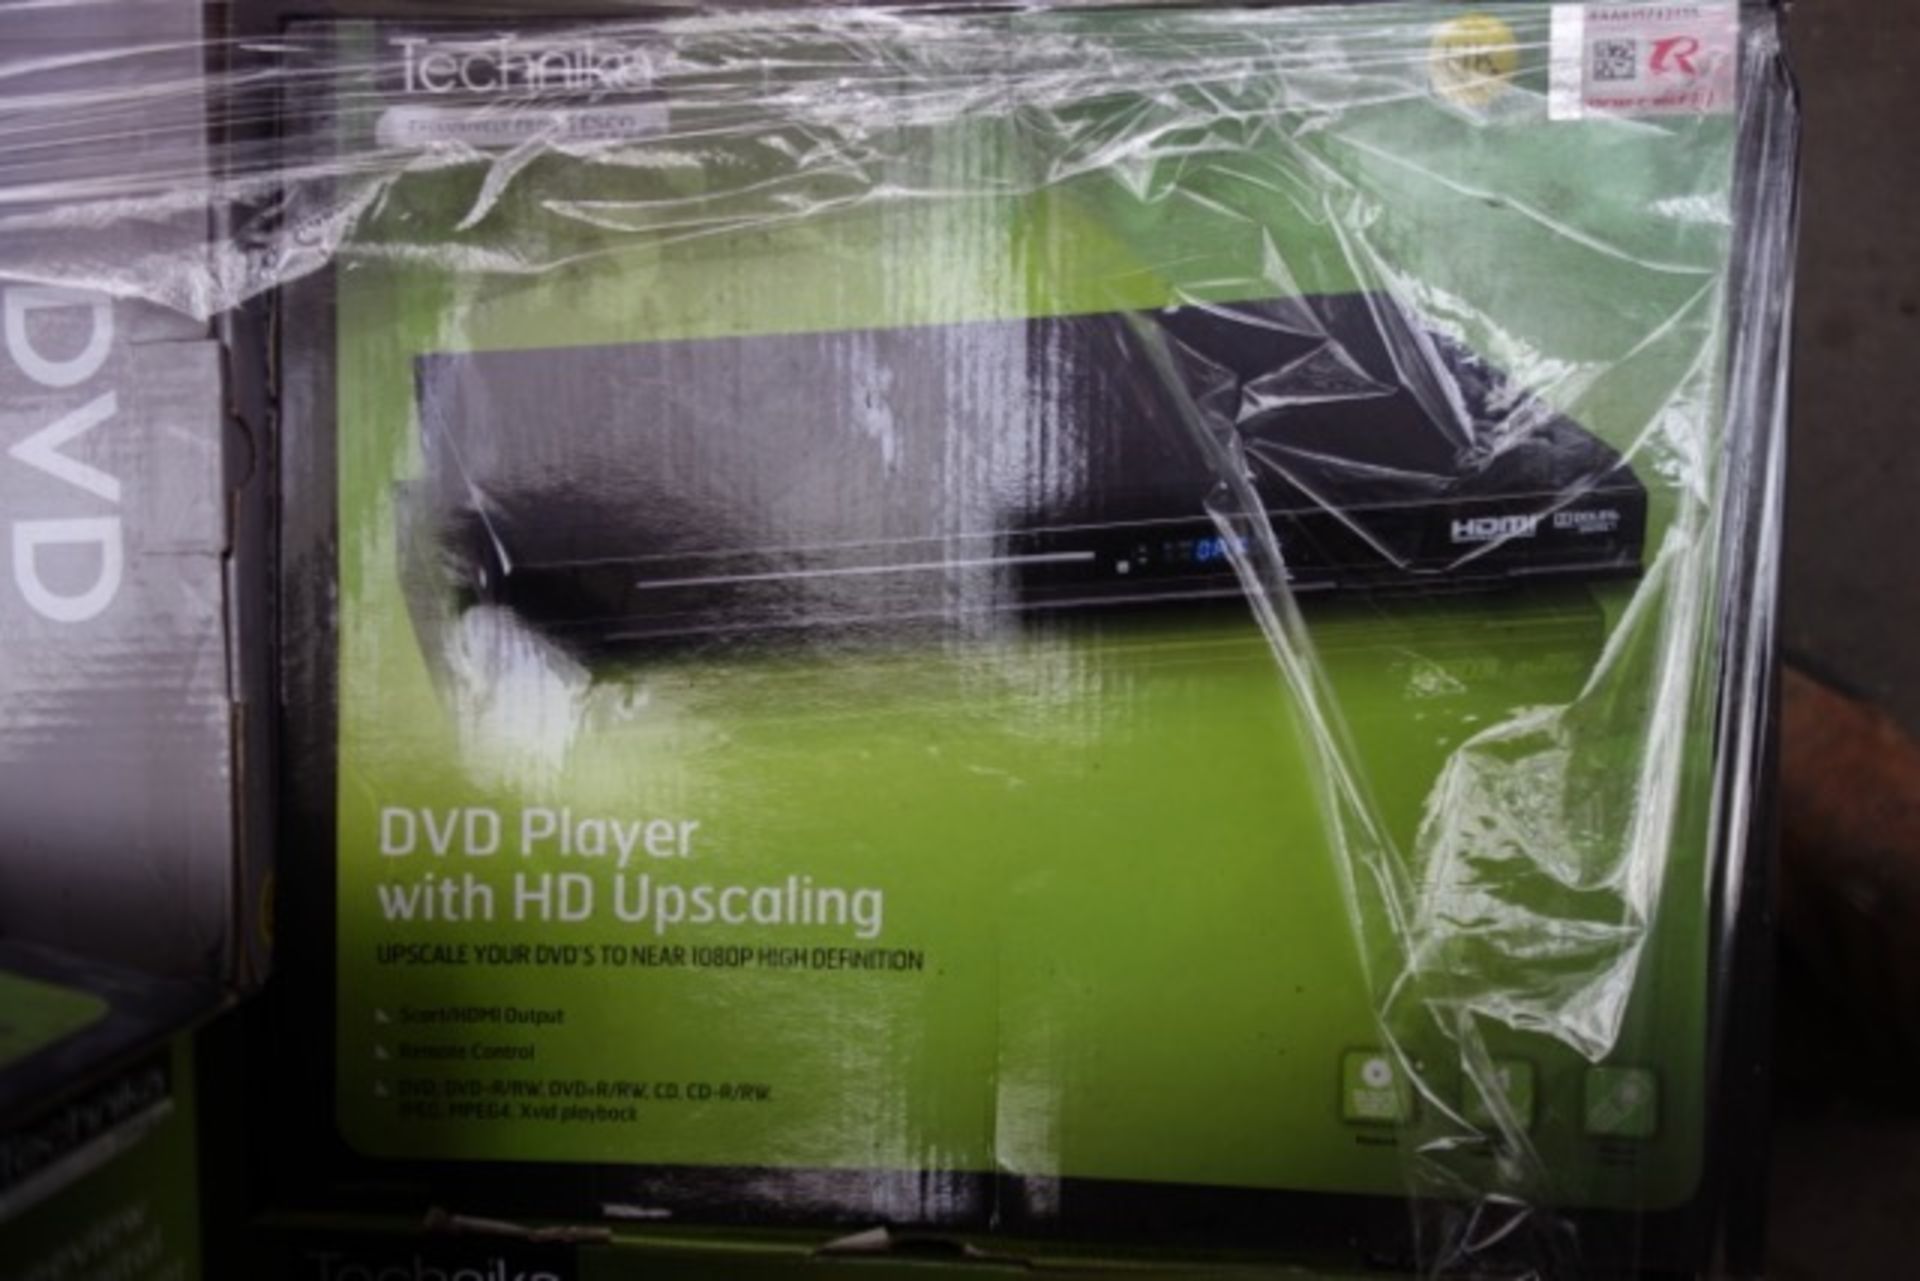 (NR9) PALLET TO CONTAIN APPROX. 60 x TESCO DVD PLAYERS WITH HD UPSCALER, FREEVIEW HD DIGITAL TV - Image 3 of 4